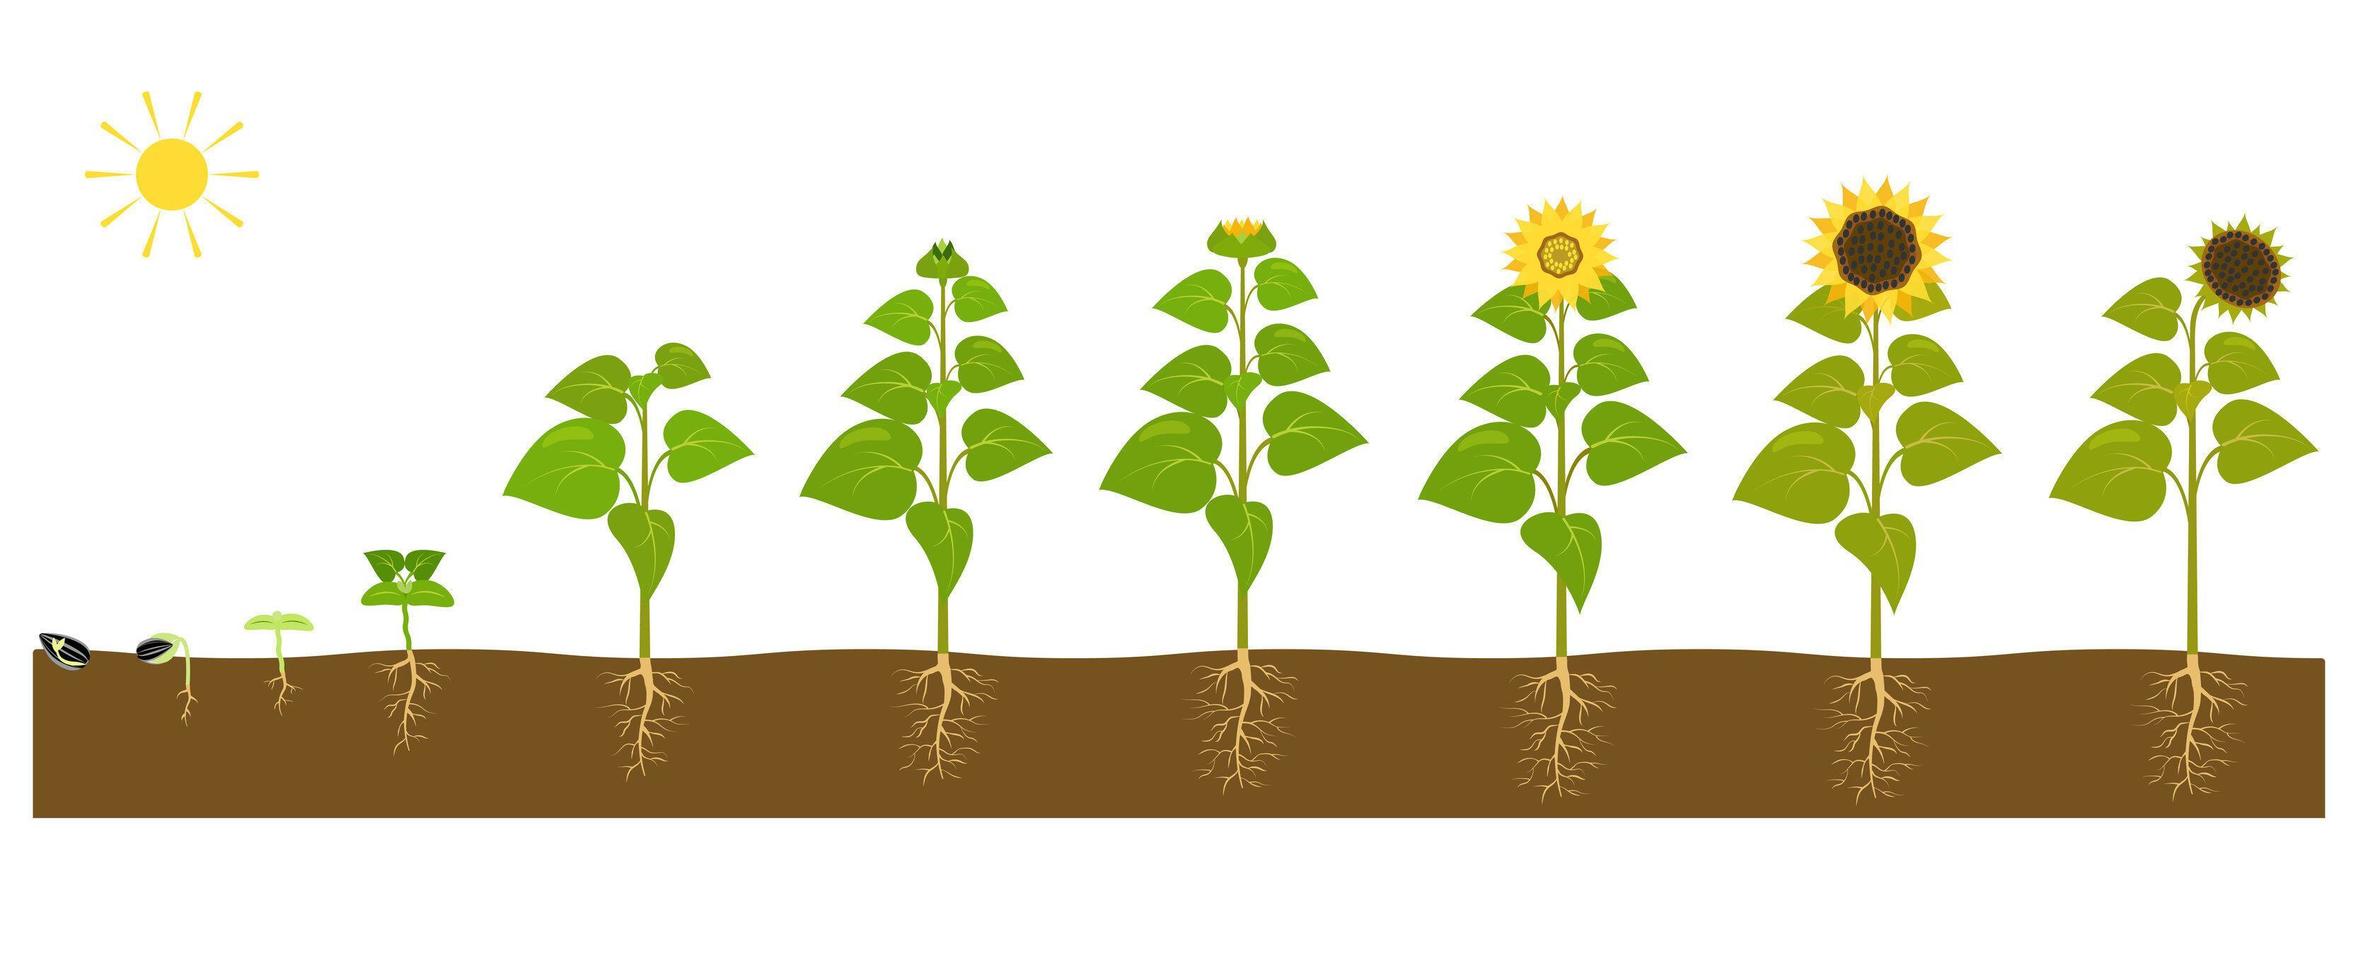 The process of growing a sunflower from seed to ripe plant. vector